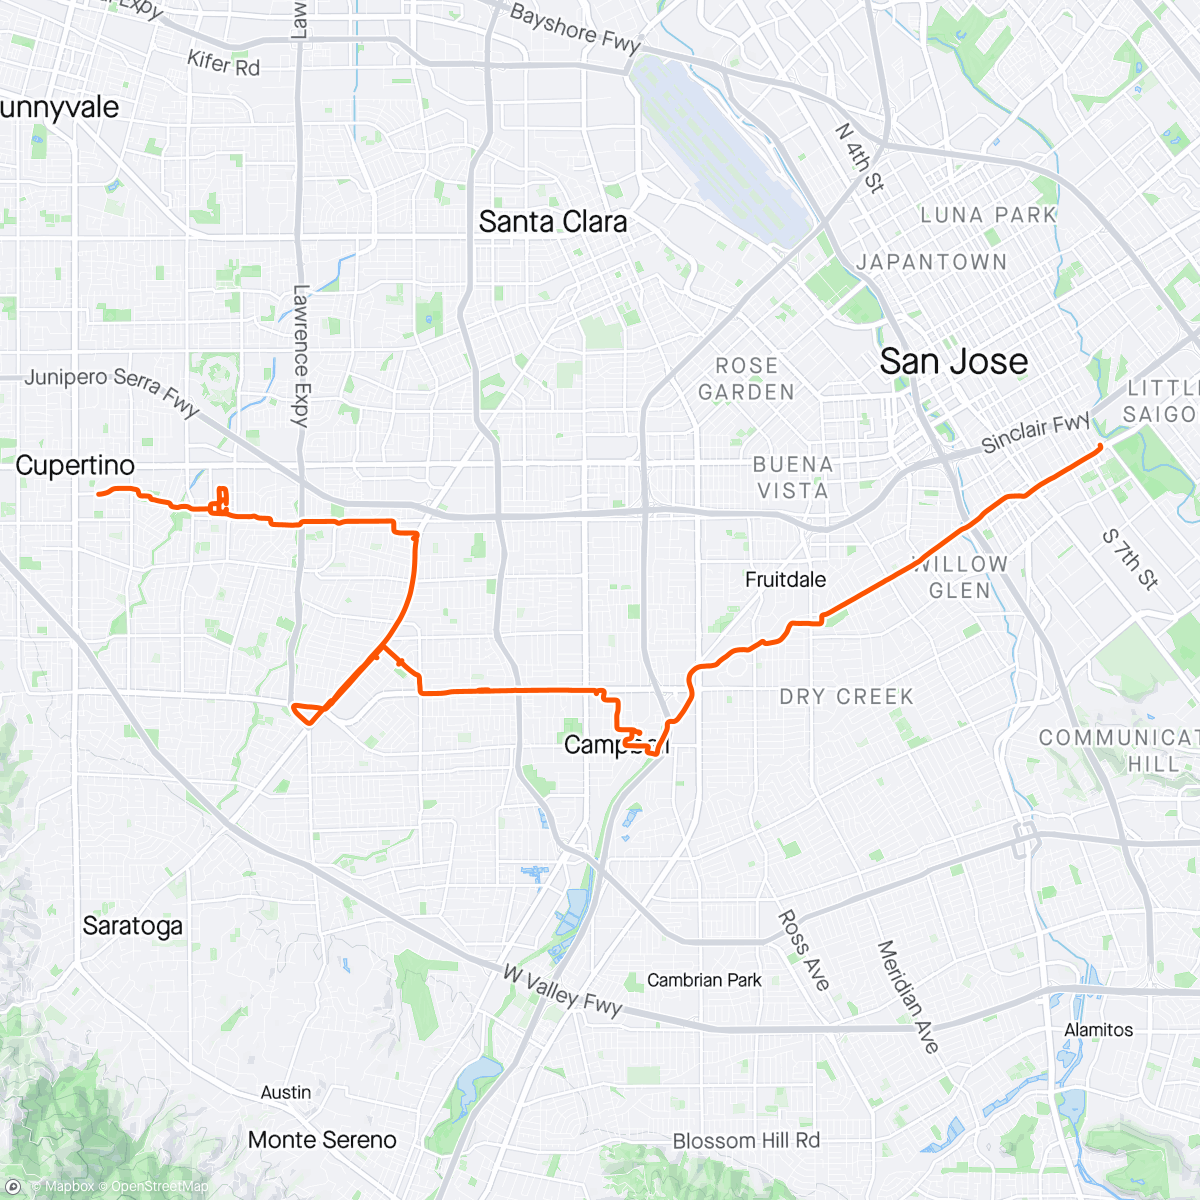 Mapa da atividade, commute from work. bunch of little ride every road cleanups i've been ignoring for a year or so